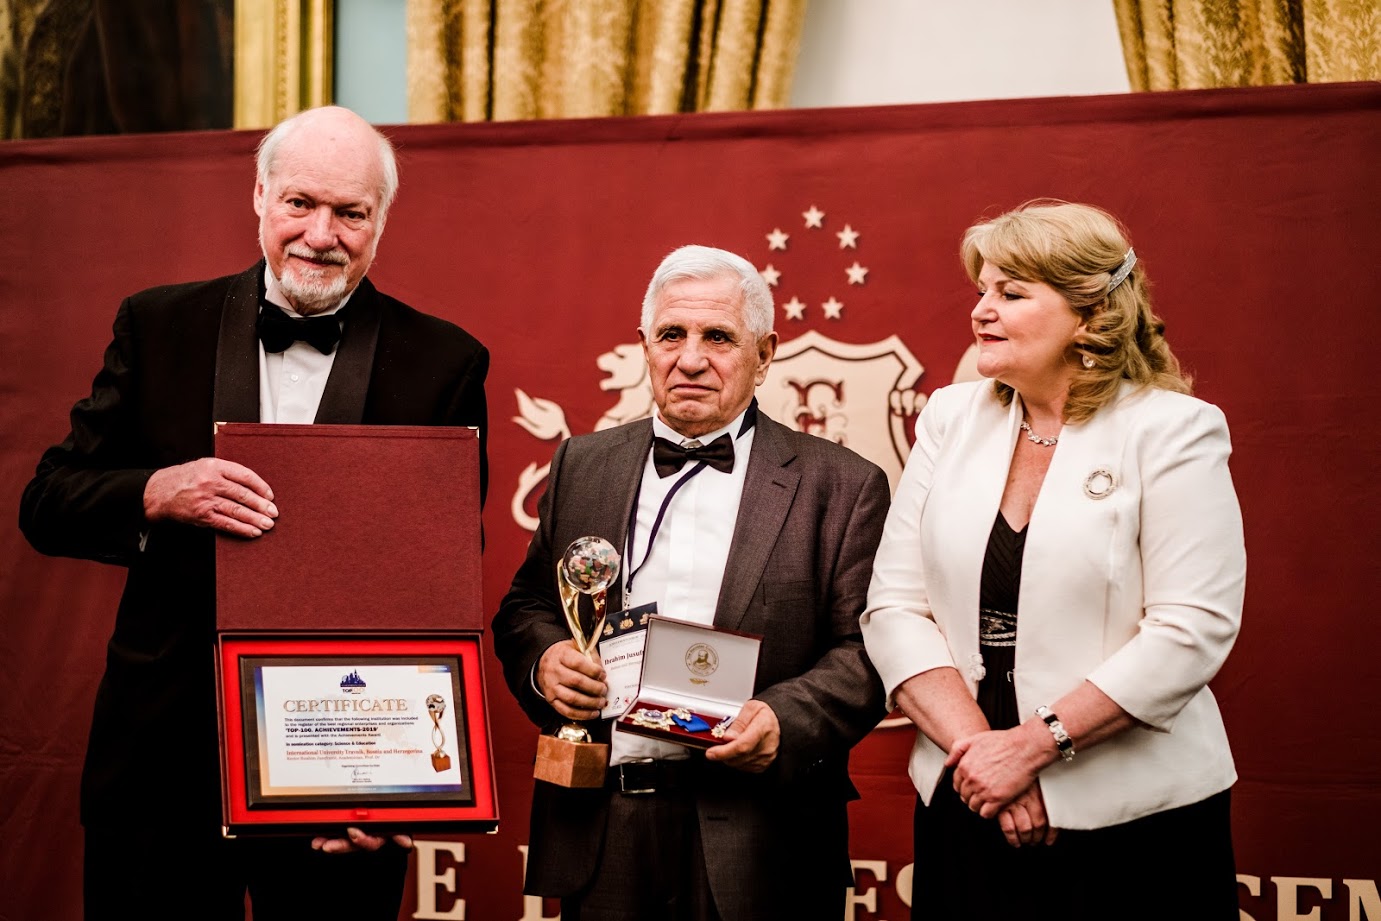 The Prestigious Award “Achievements 2019” For Excellence In Science And Education Was Awarded To IUT Rector Ibrahim Jusufranić In London